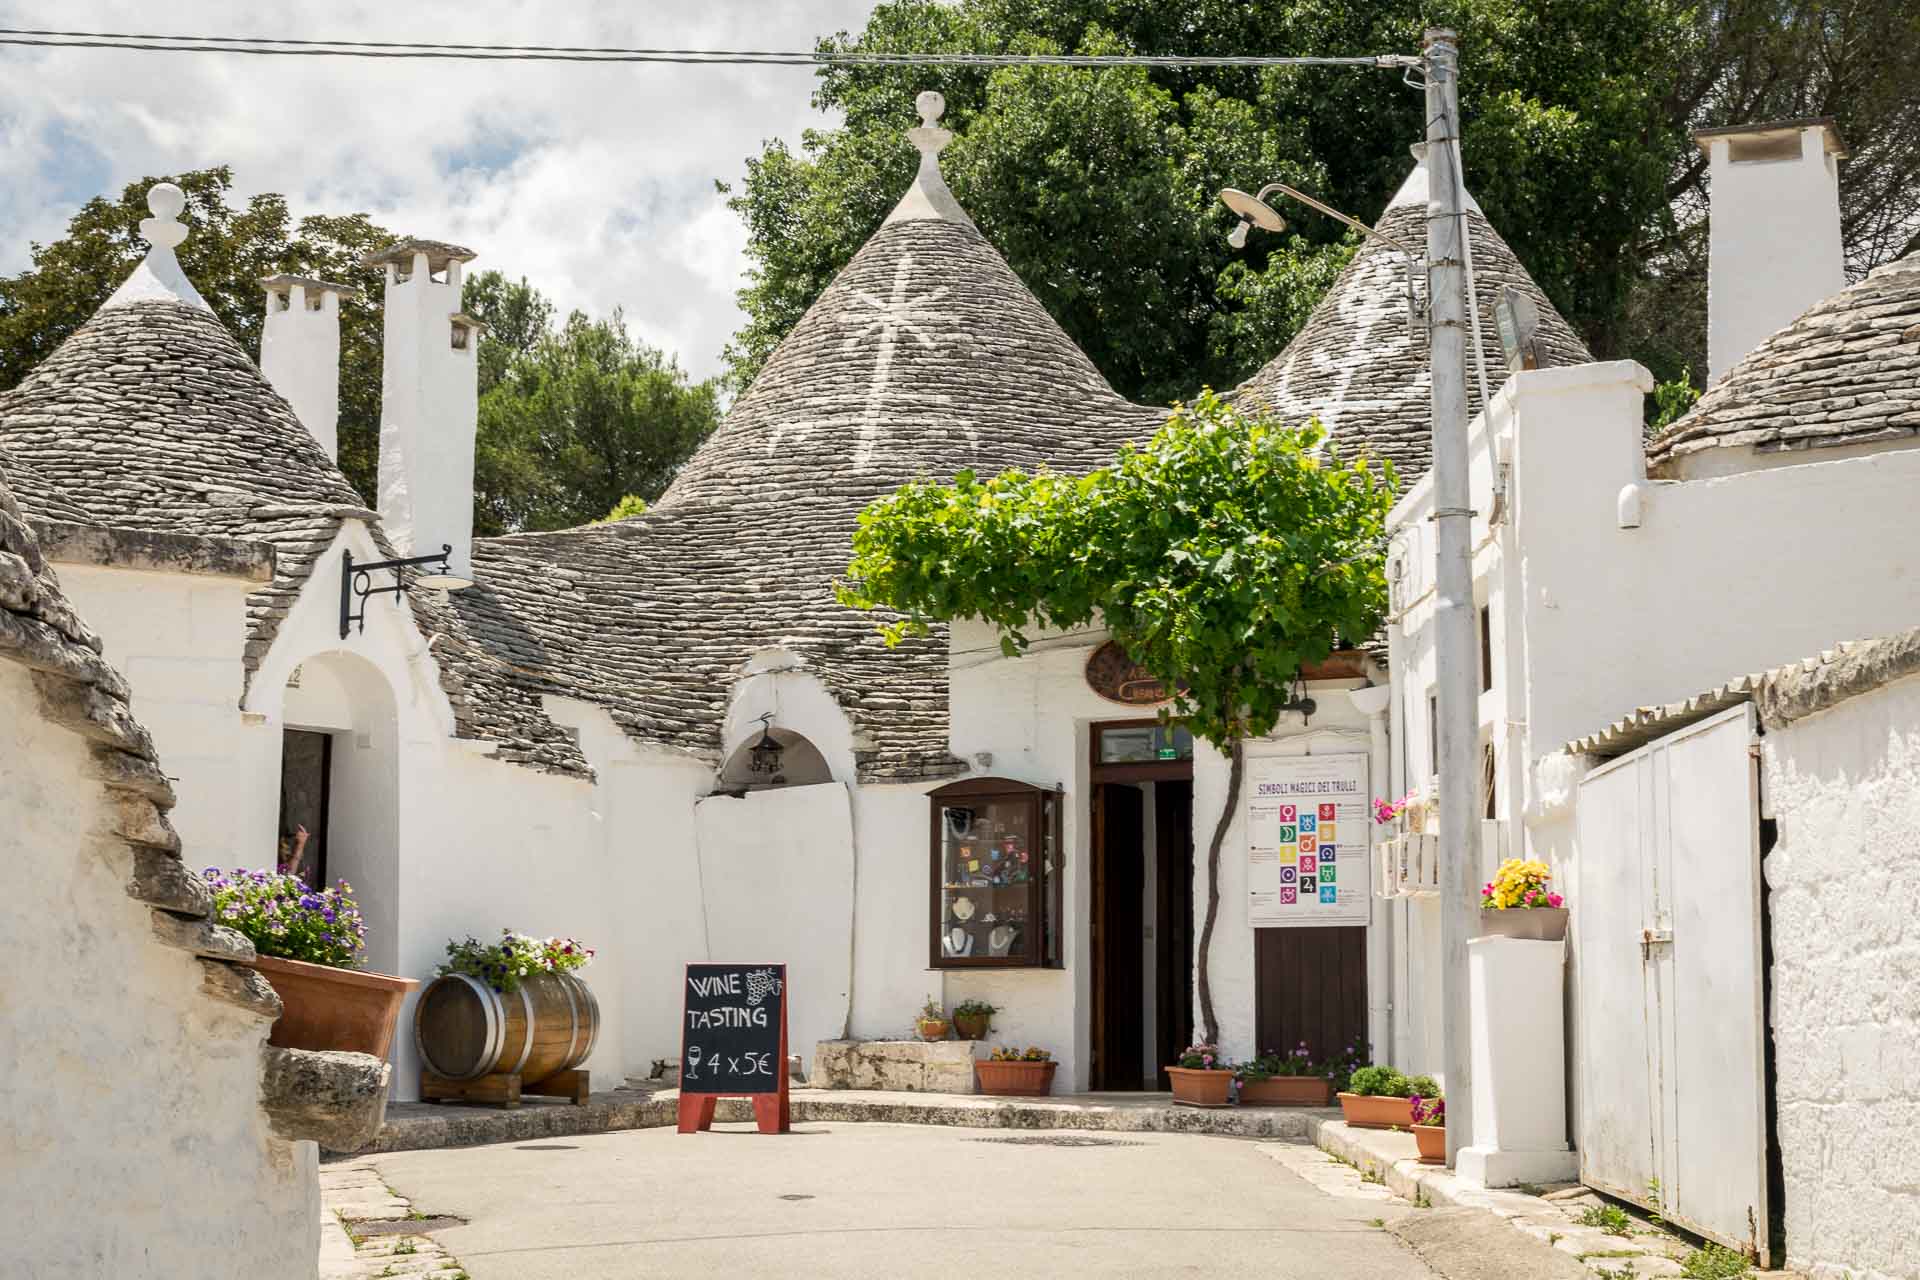 A dead end road with many trulli houses, one of them changed into a restaurant with a menu on the door